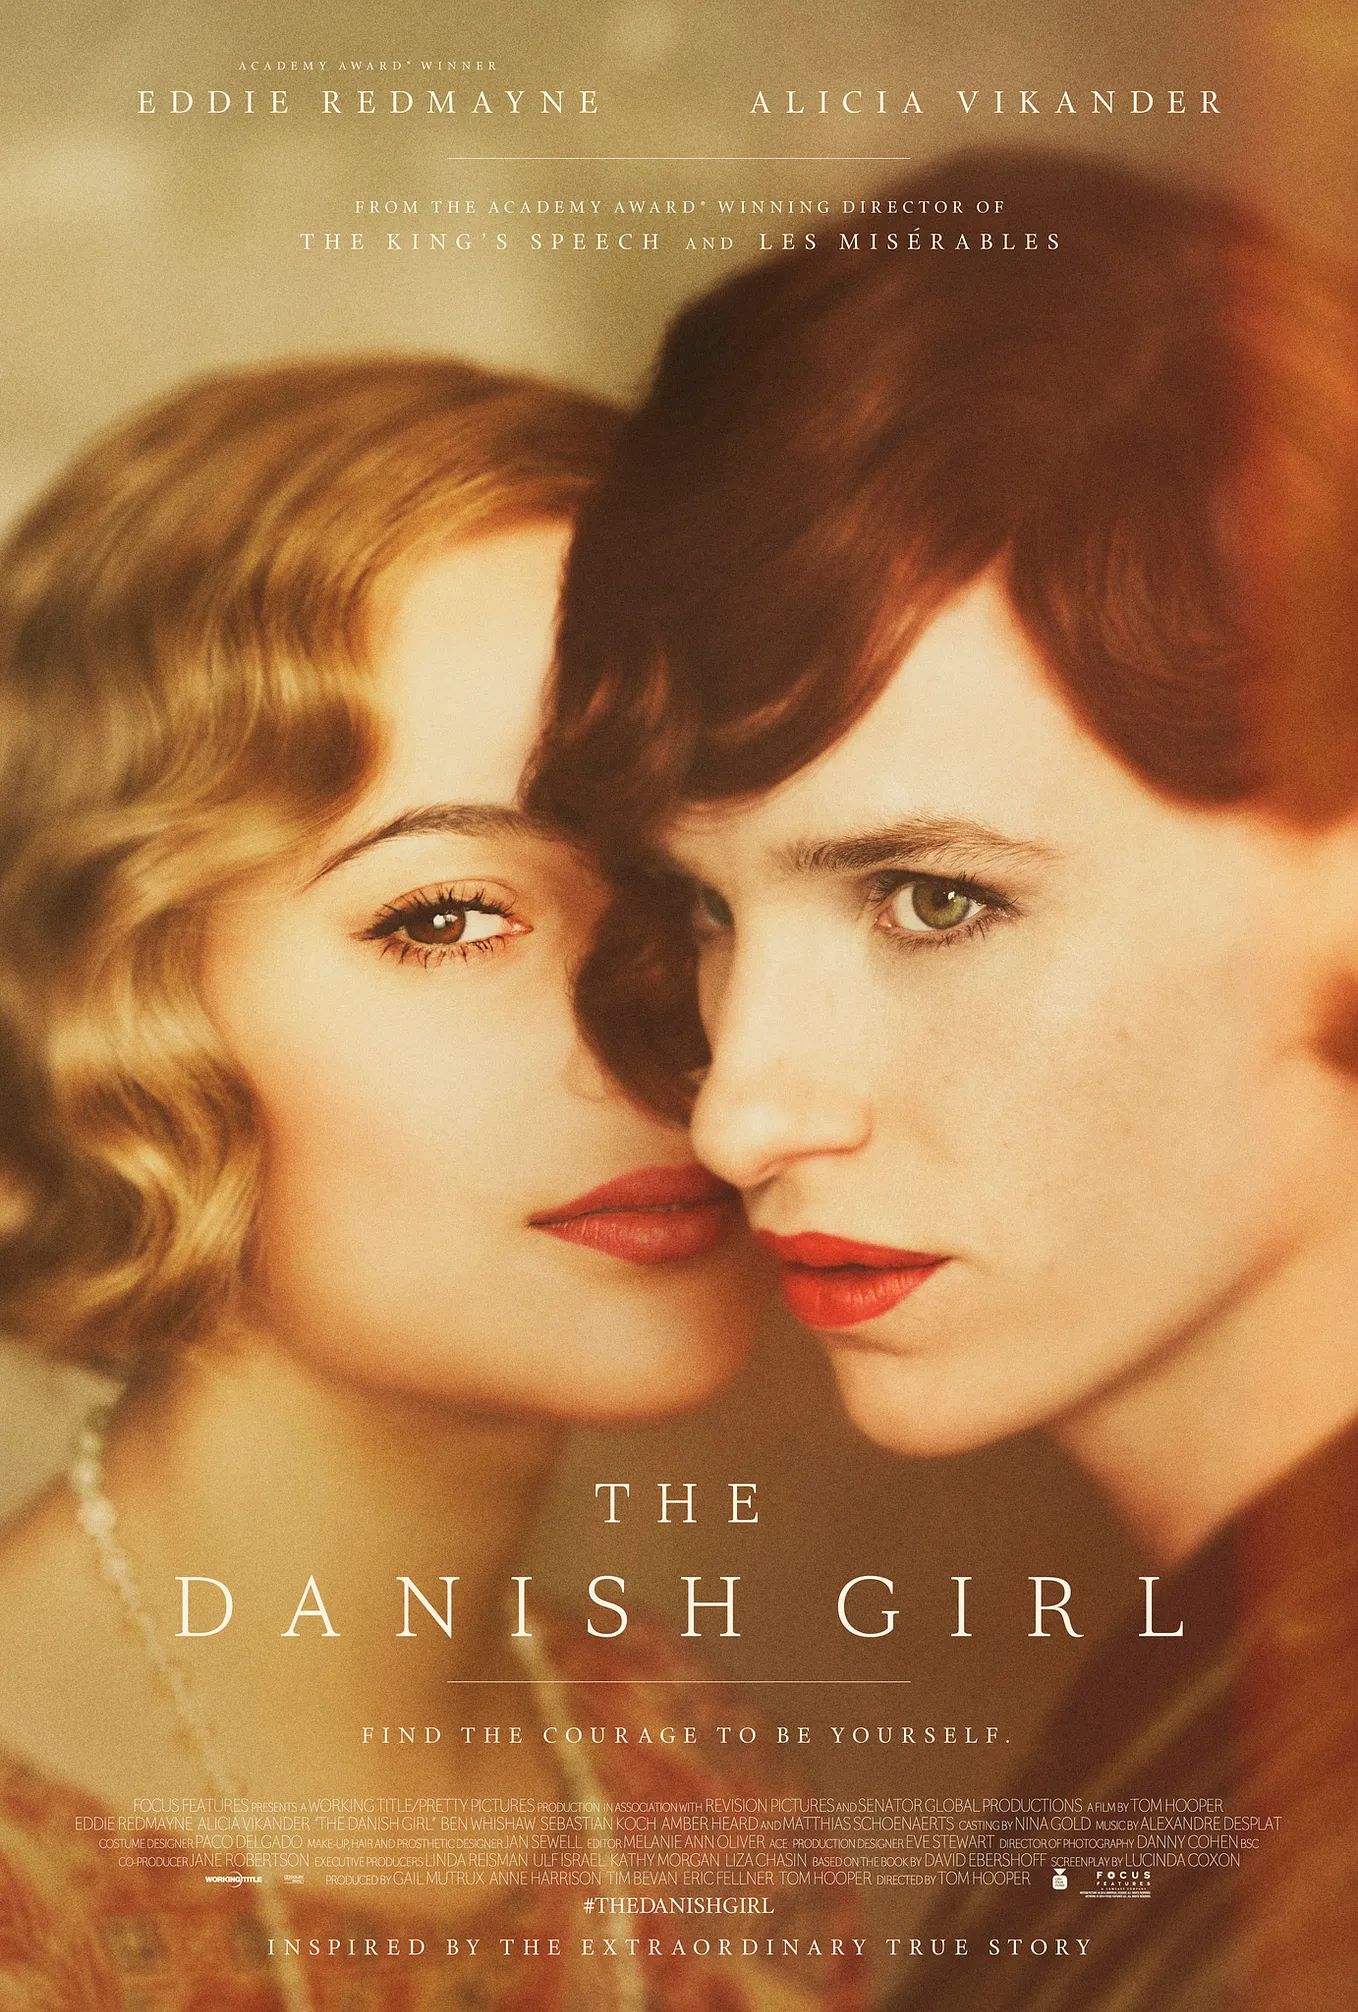 The Danish Girl — Incredible story for the times such as ours